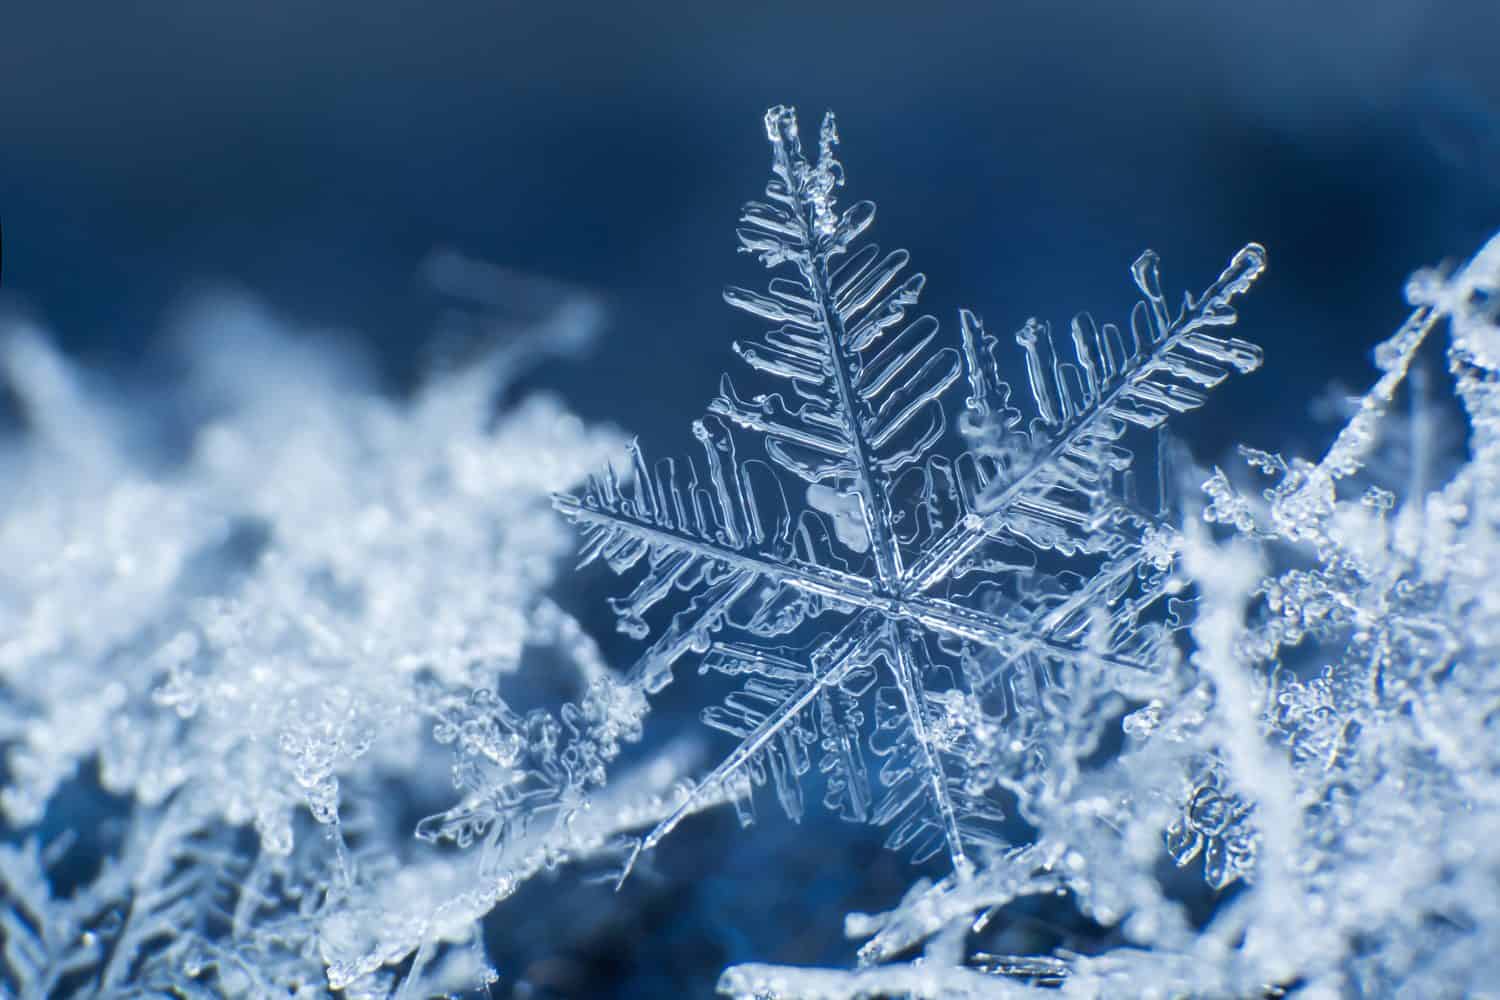 Is each snowflake really unique? The amazing science of snow - Cottage Life